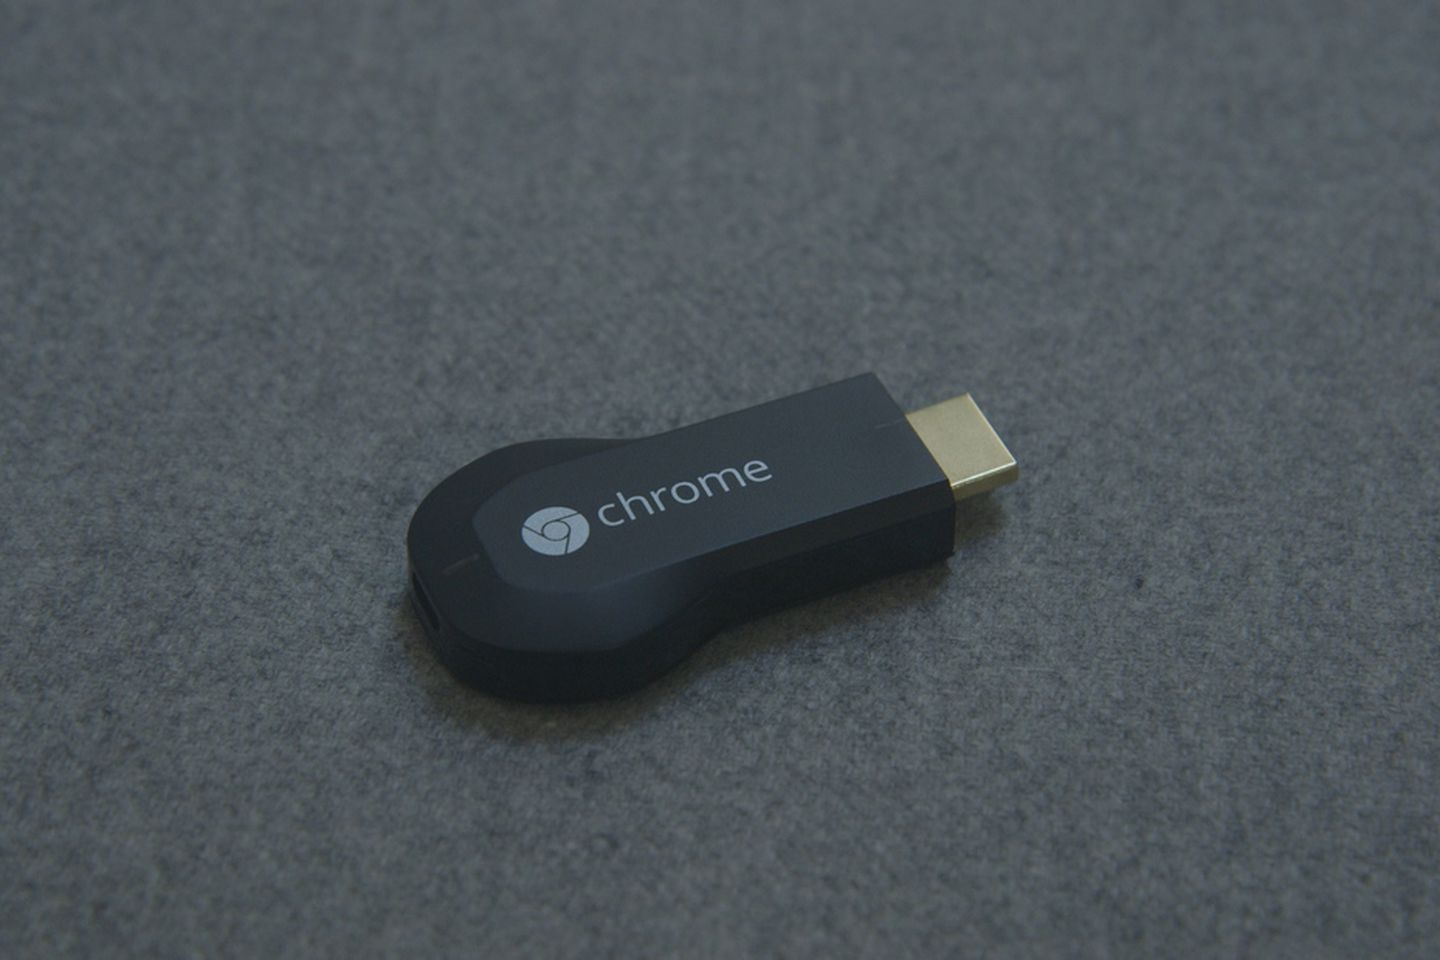 Chromecast can now play embedded YouTube videos on your TV - The Verge